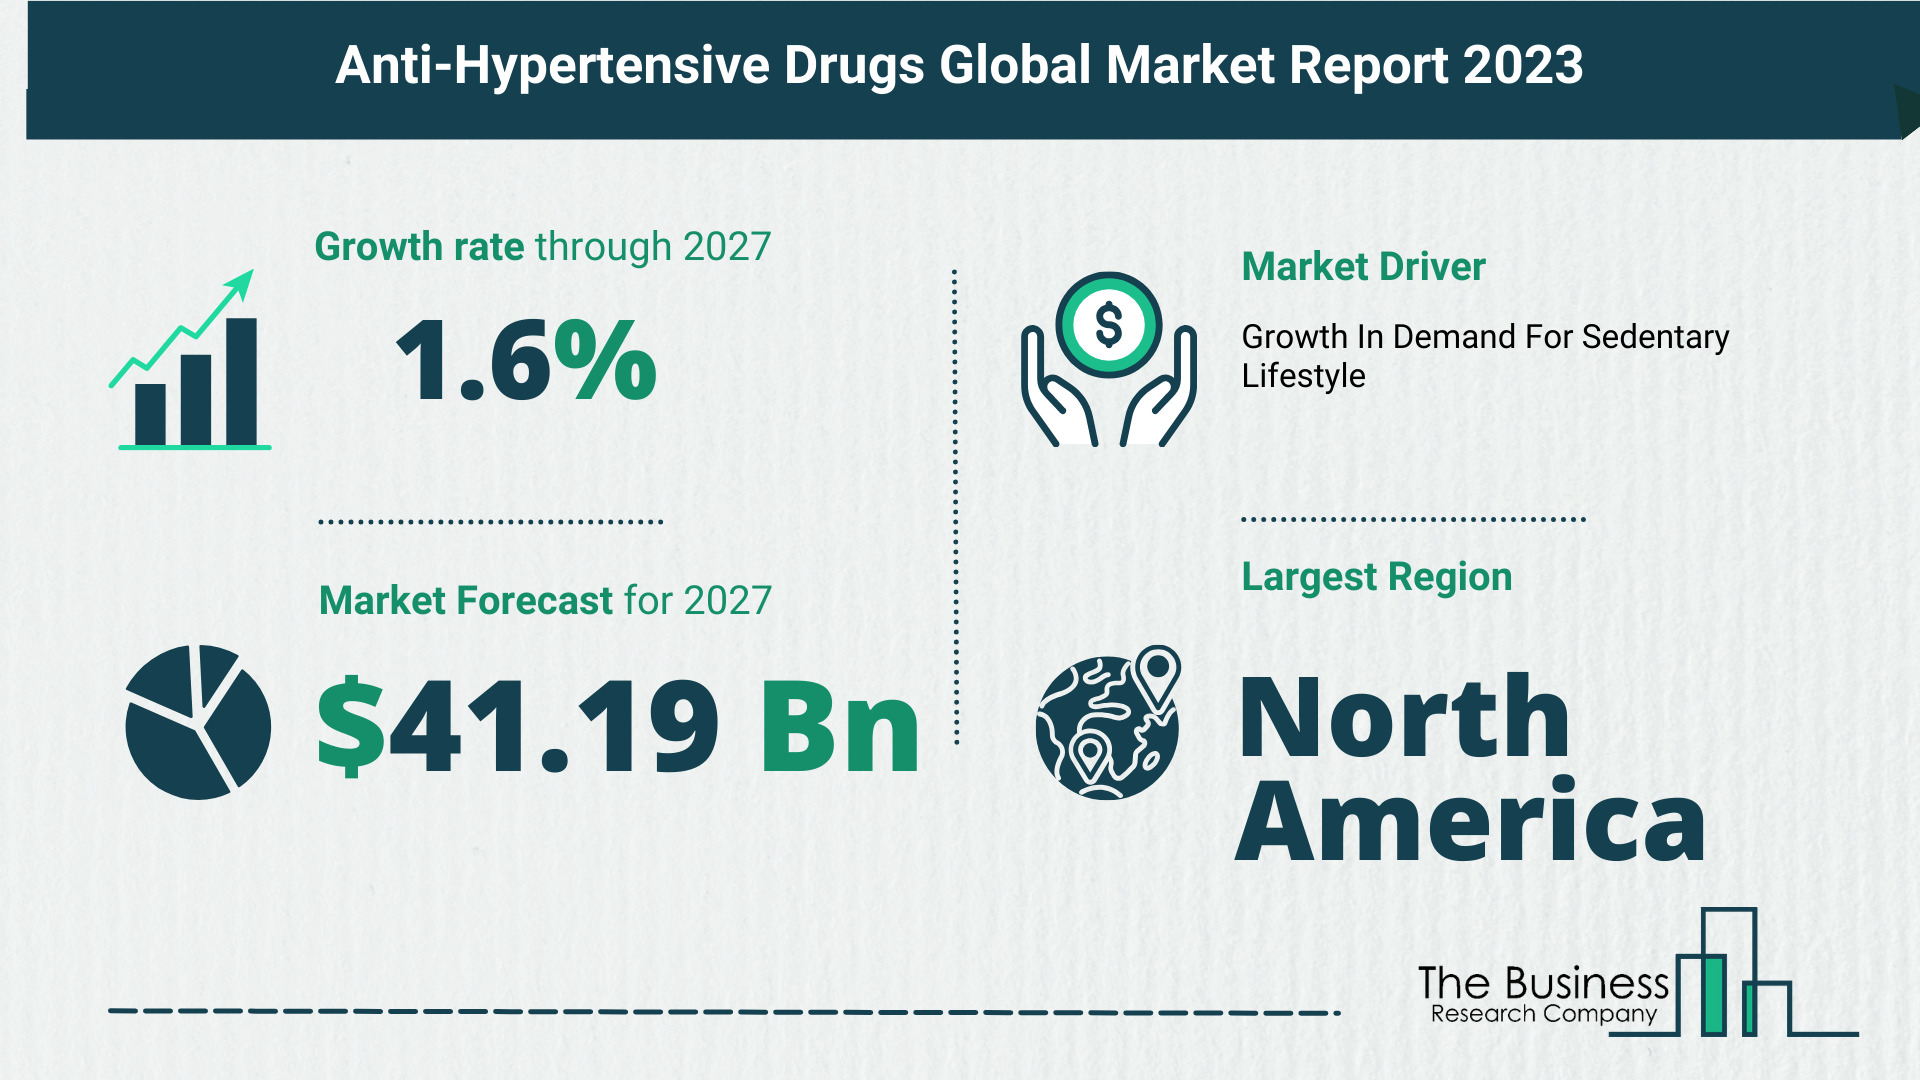 Key Insights On The AntiHypertensive Drugs Market 2023 – Size, Driver, And Major Players